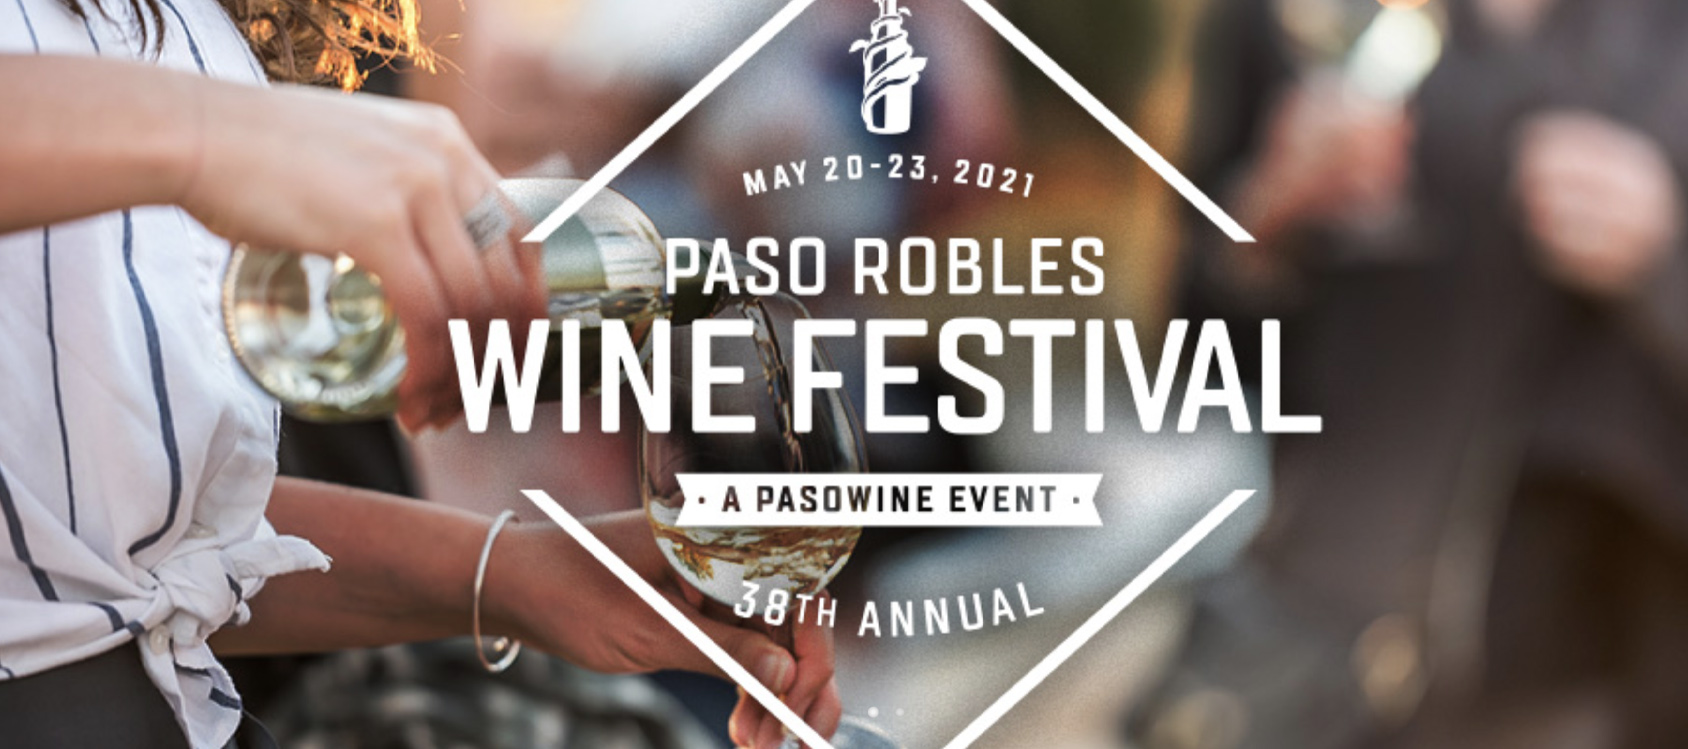 Paso Robles Wine Festival Weekend Returns with Focus on Individual